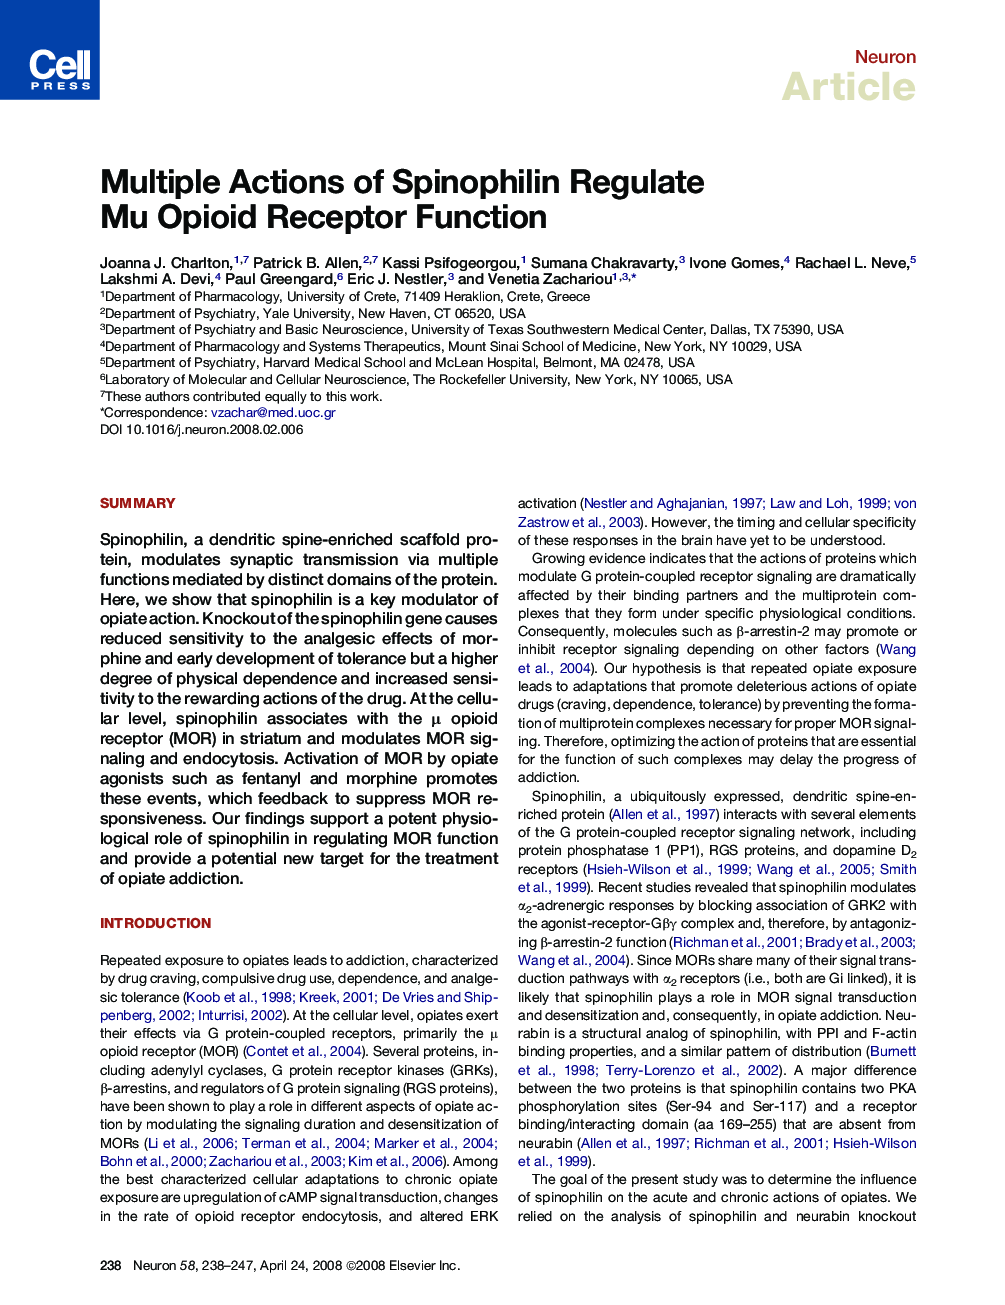 Multiple Actions of Spinophilin Regulate Mu Opioid Receptor Function